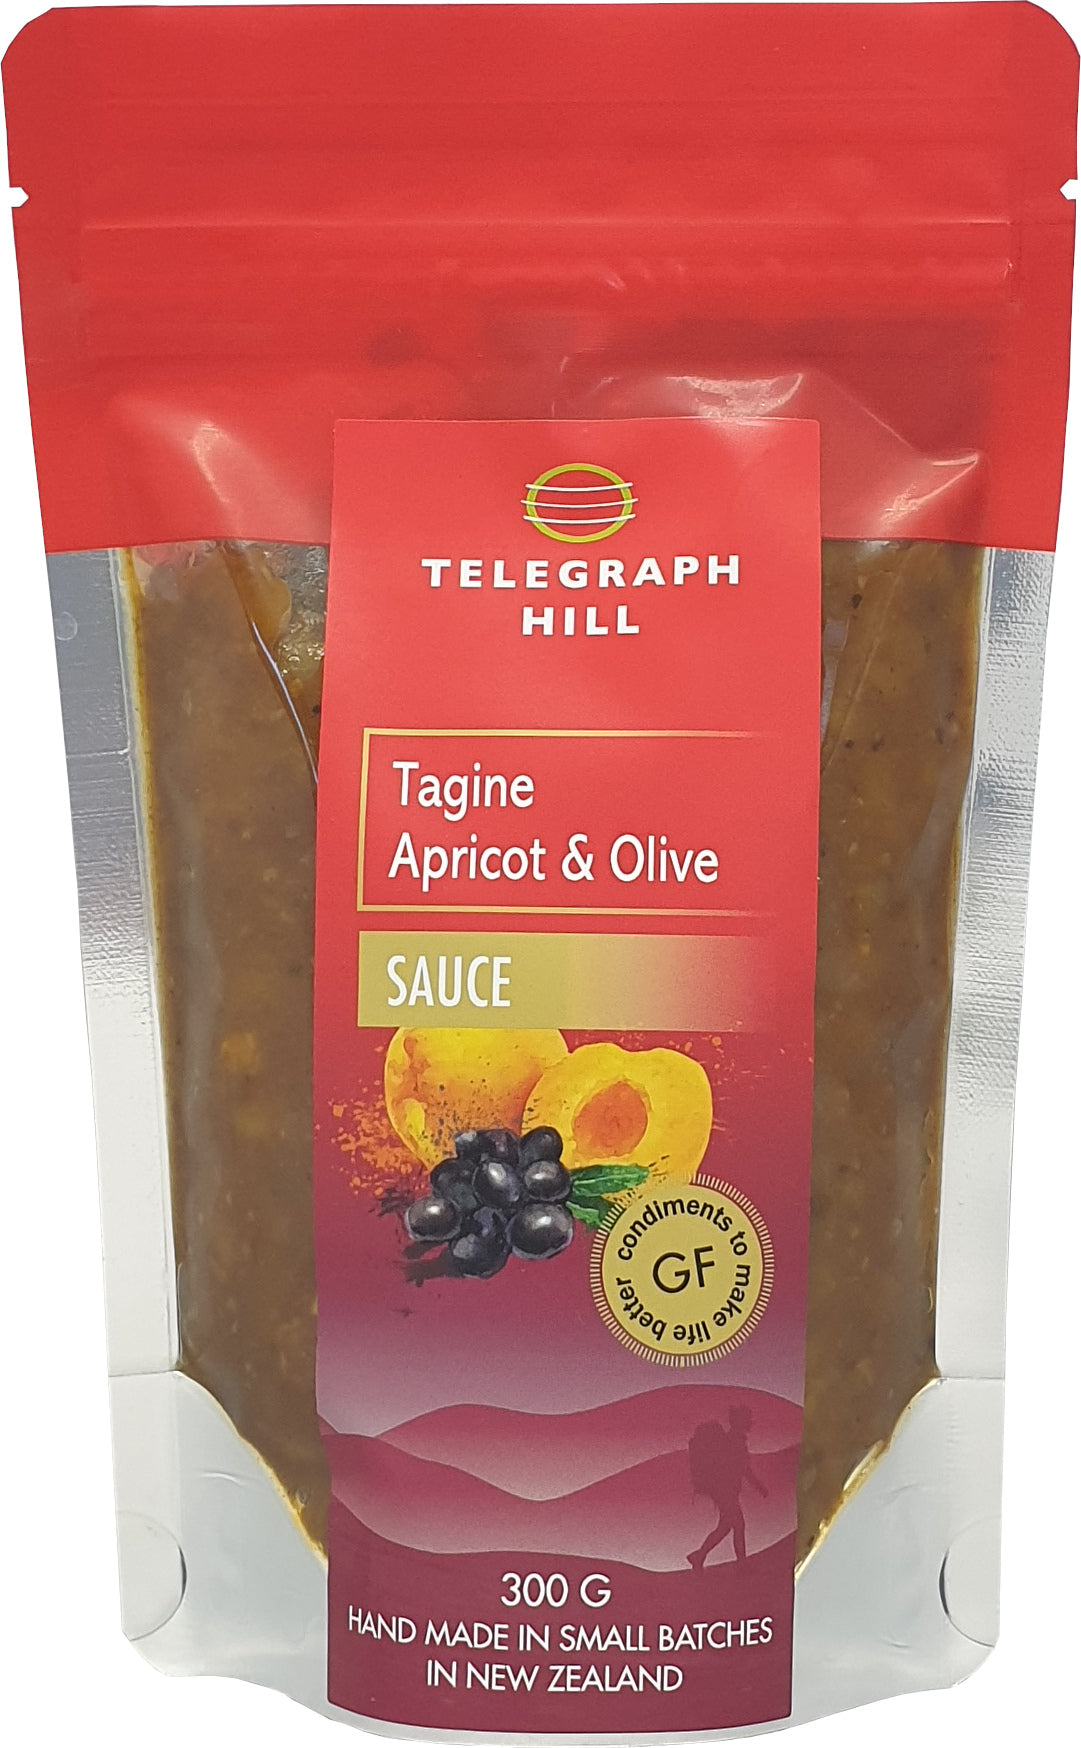 How to use: Apricot and Olive Tagine